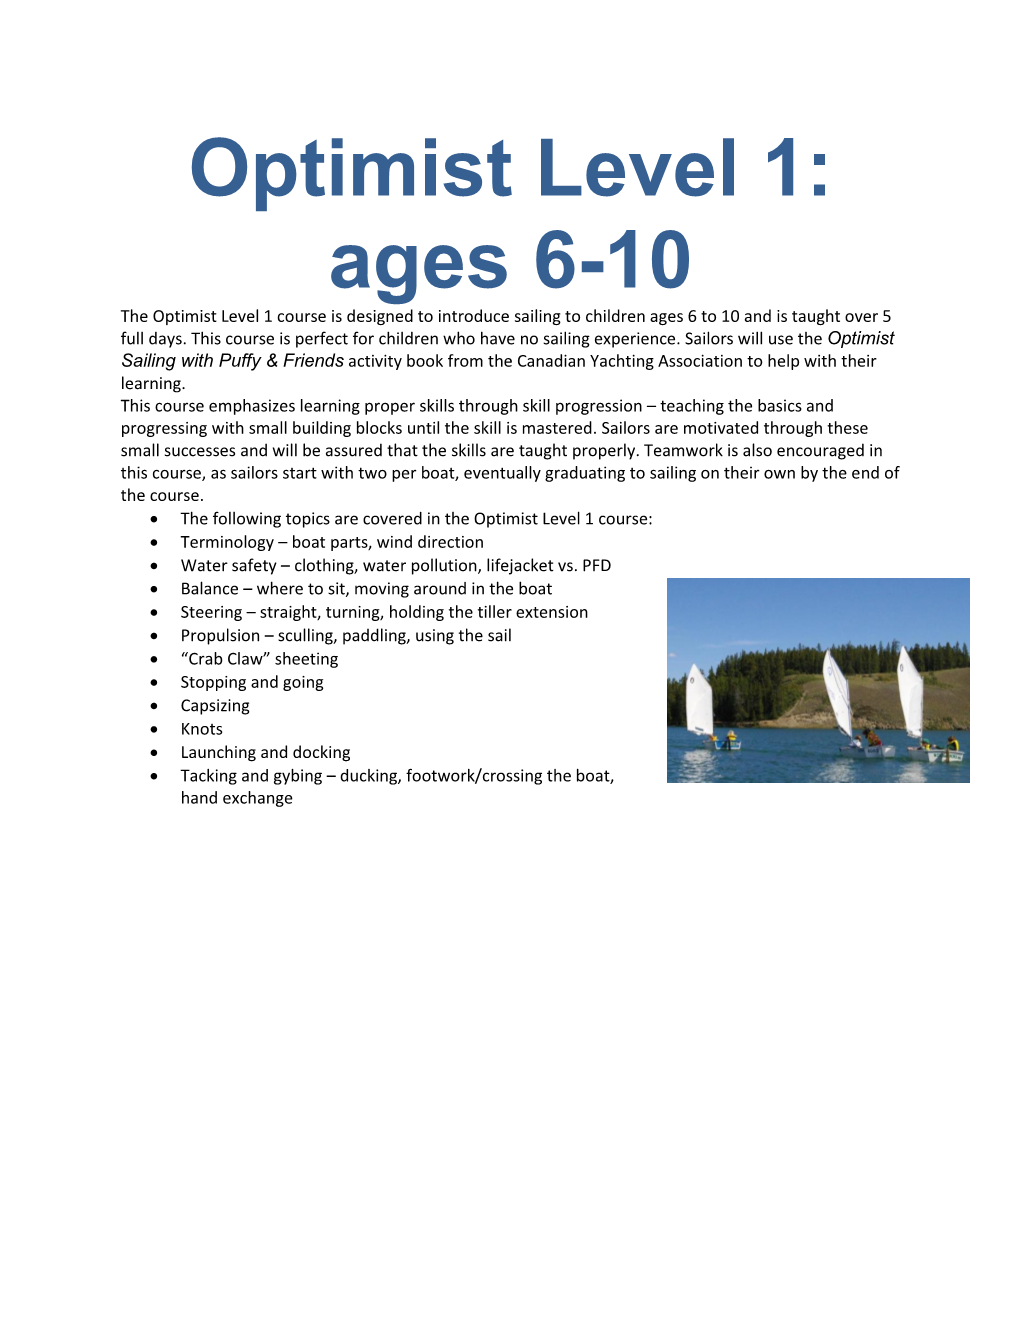 Optimist Level 1: Ages 6-10 the Optimist Level 1 Course Is Designed to Introduce Sailing to Children Ages 6 to 10 and Is Taught Over 5 Full Days